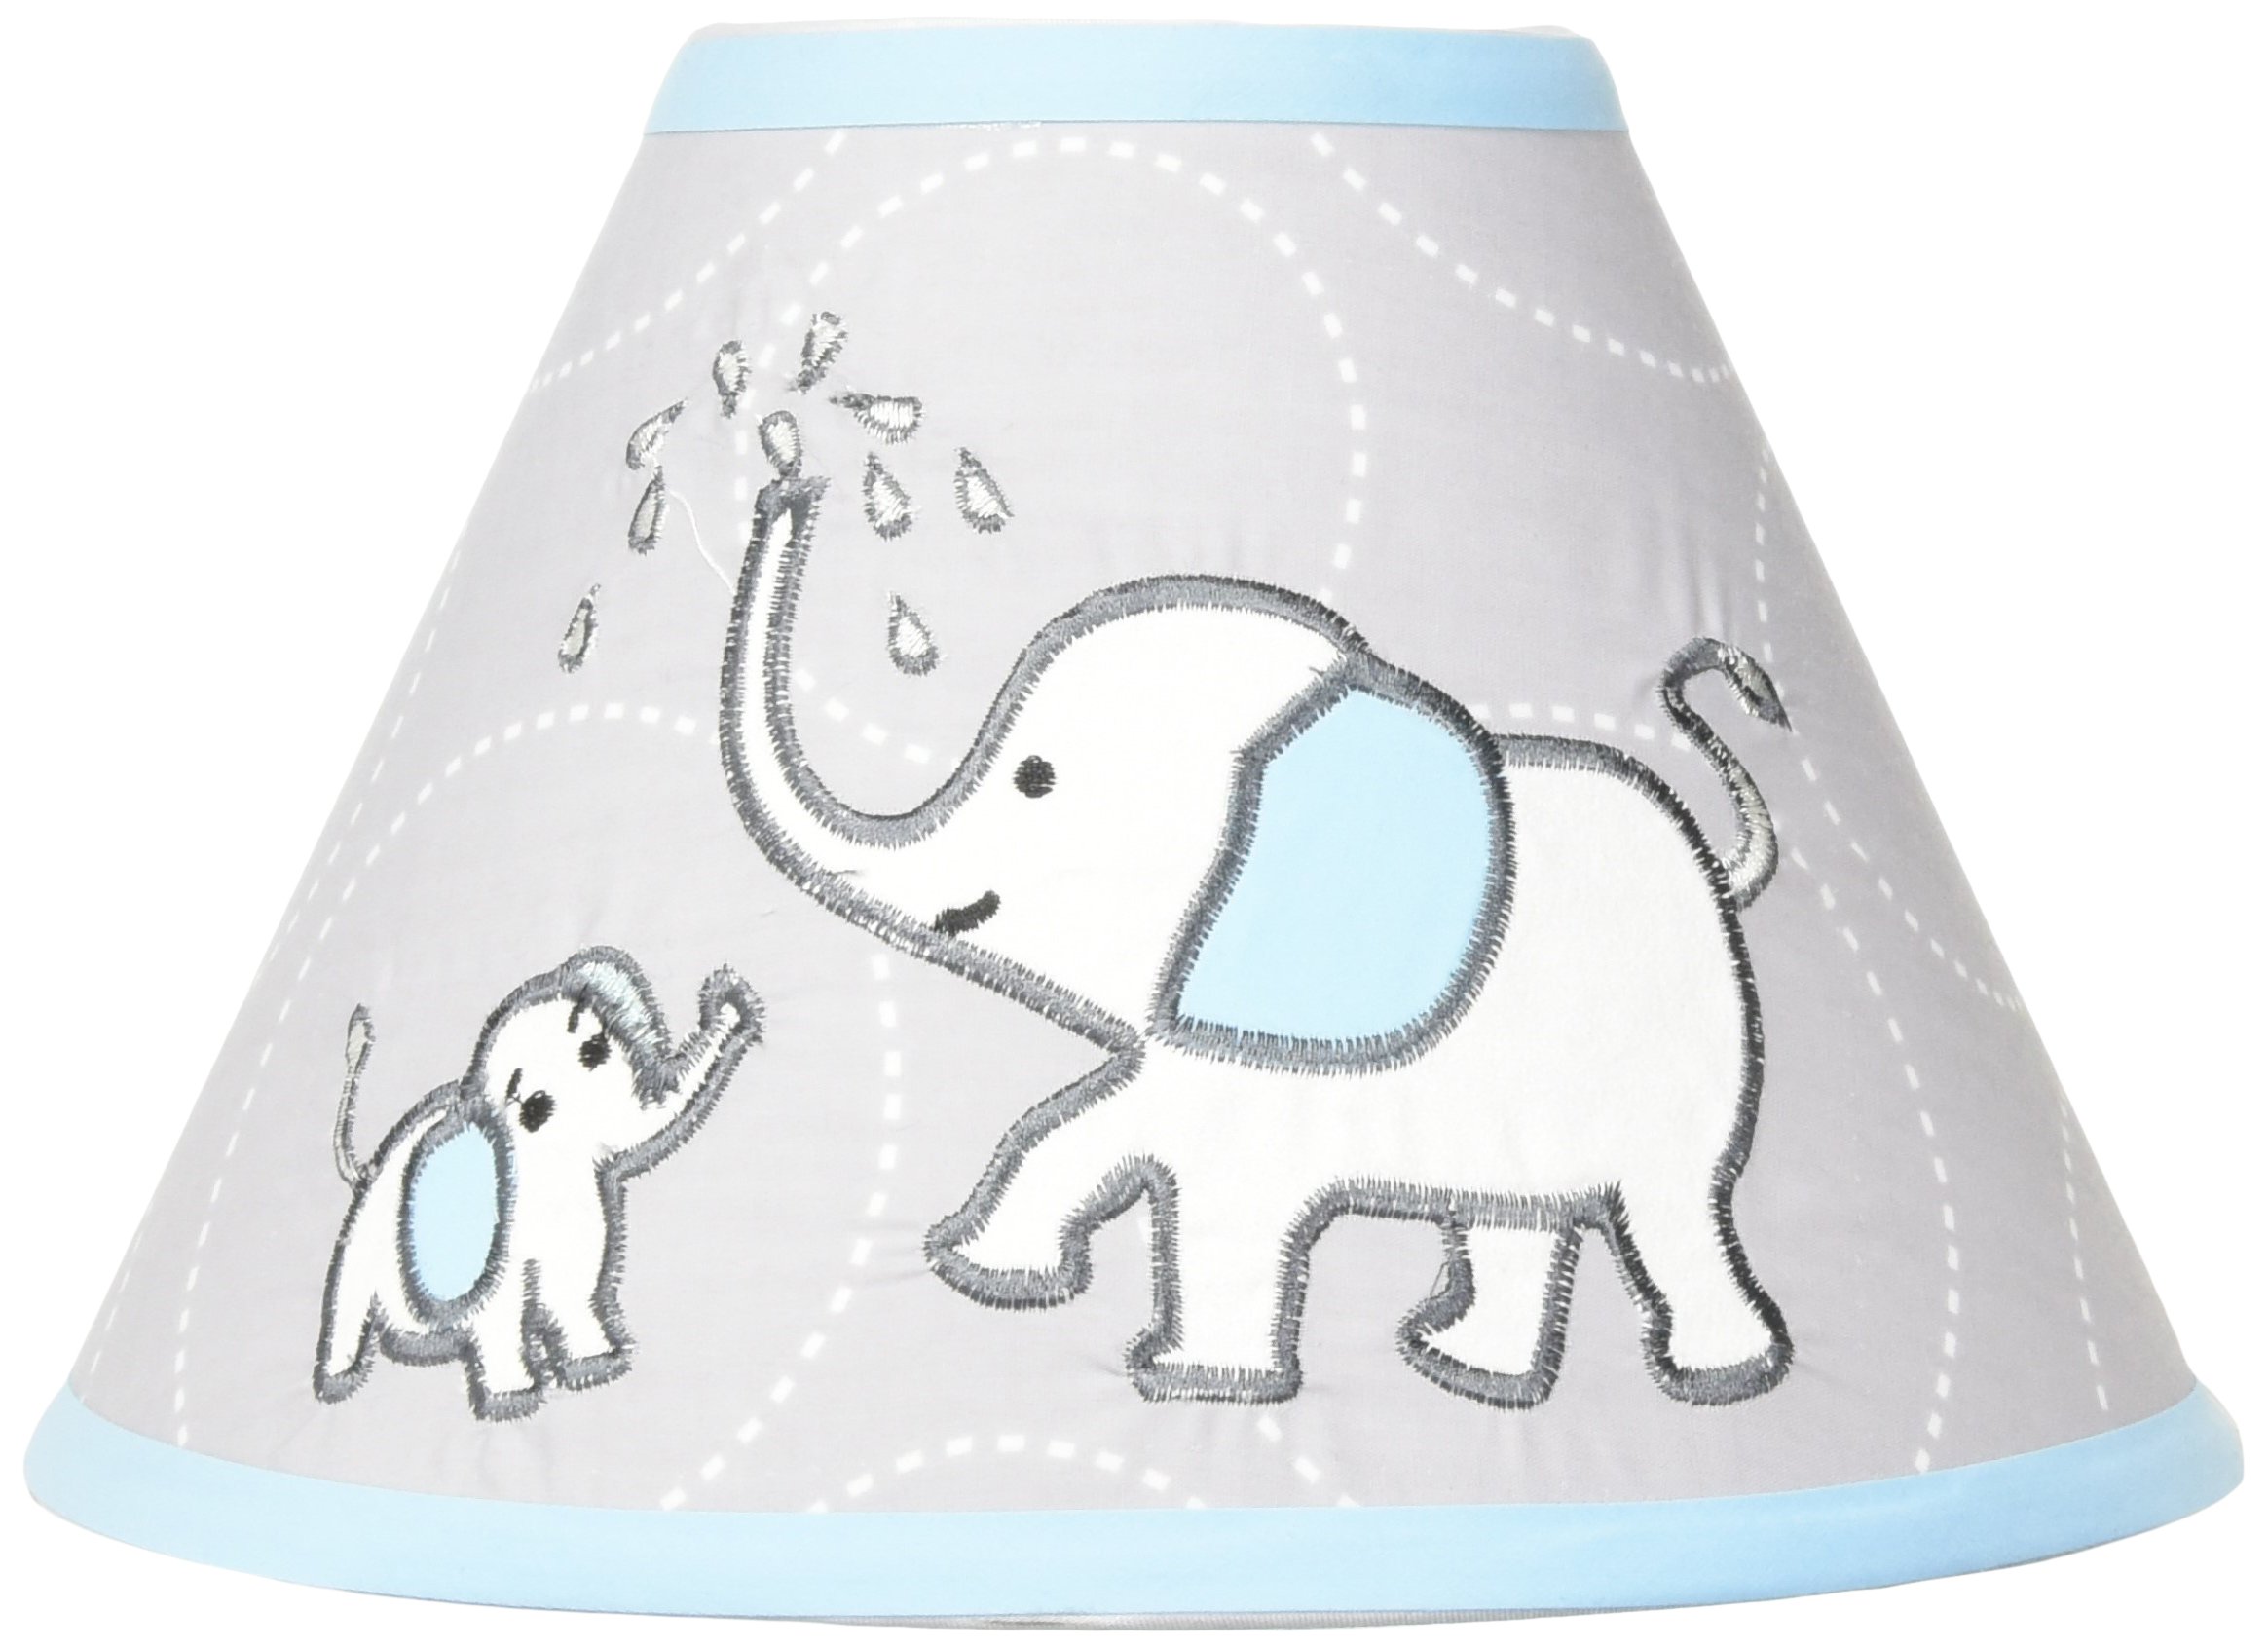 GEENNY Nursery Lamp Shade with Elephants Embroidery, Cute Baby, Infant & Kids Bedrooms Decor and Accessories Without Base, Blizzard Blue Grey Eleph...